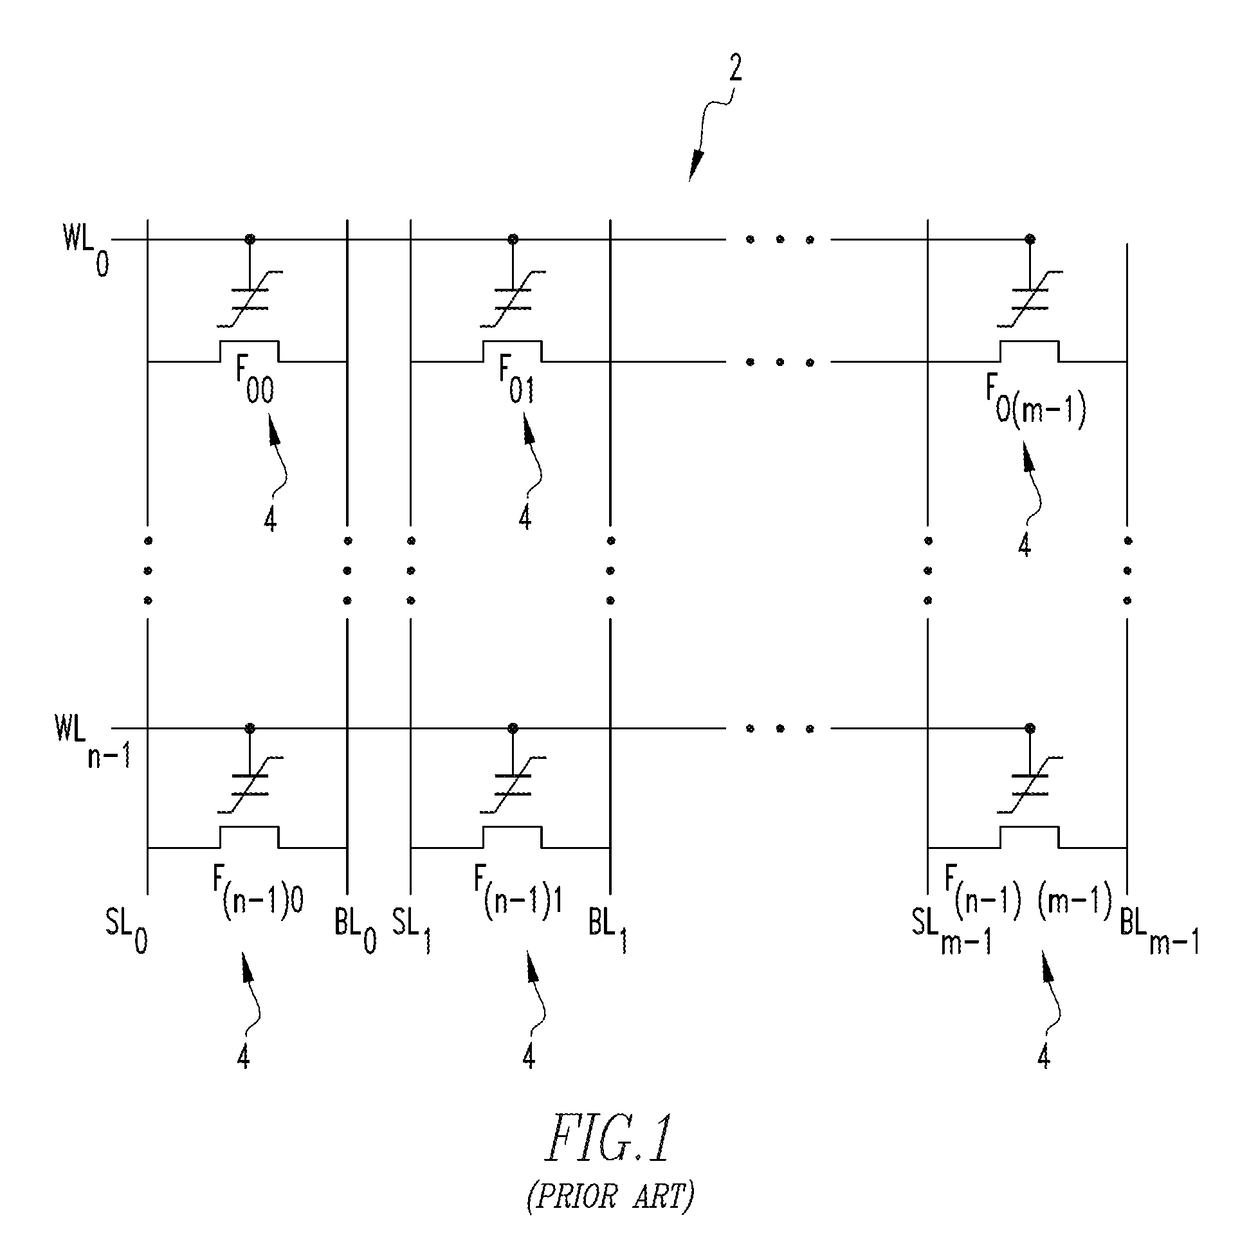 ADAPTIVE REFRESHING AND READ VOLTAGE CONTROL SCHEME FOR A MEMORY DEVICE SUCH AS AN FeDRAM